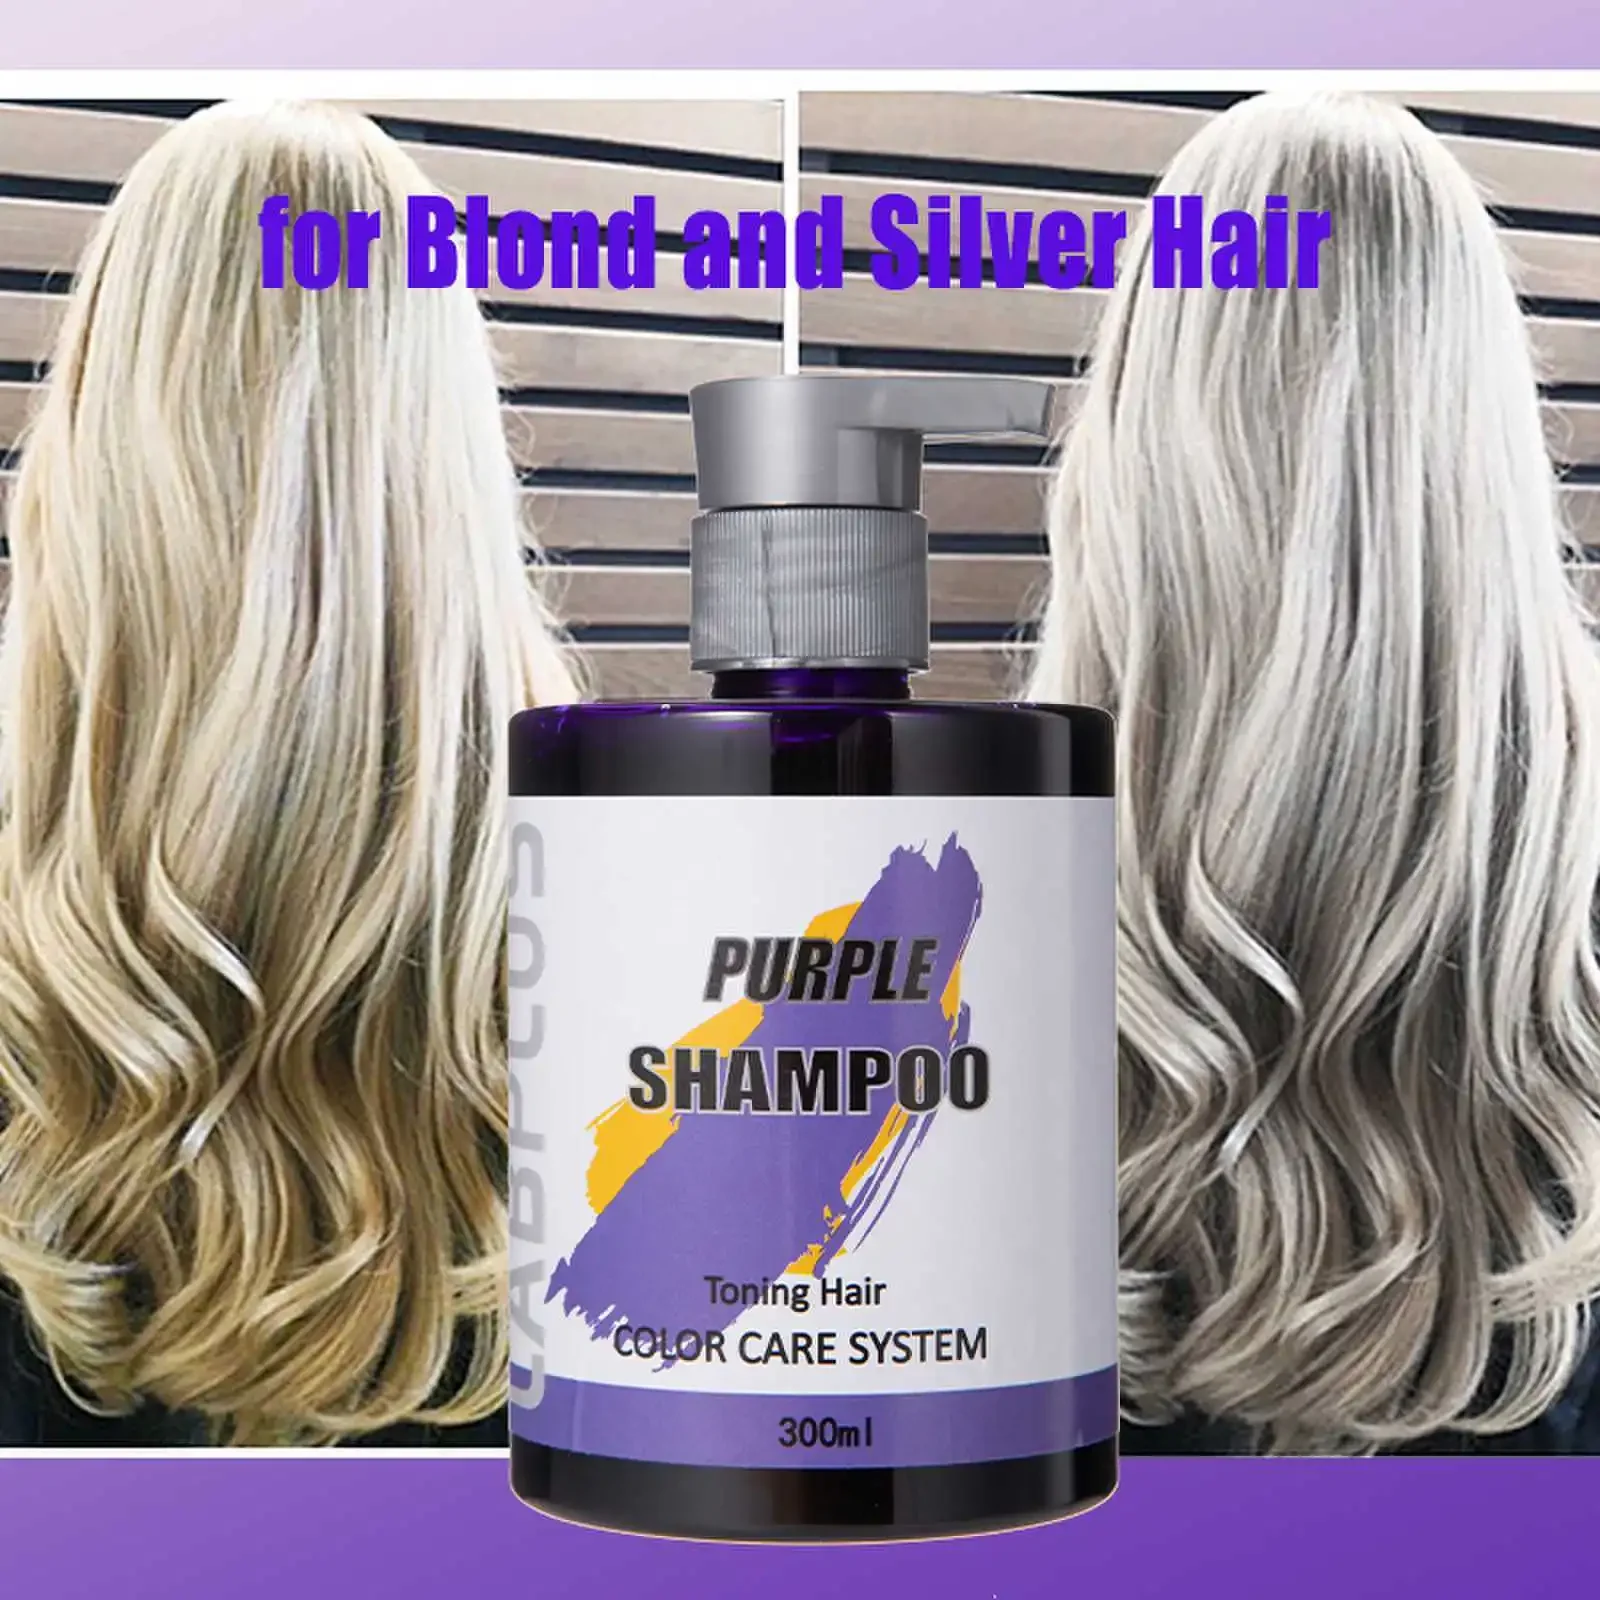 Blonde Hair Shampoos Remove Yellow Professional Blonde Bleached Highlighted Shampoo Revitalize Effective Purple Shampoo 5v 5050 led strip rgb white warm white red yellow blue green 60led meter highlighted soft article lamp lighting